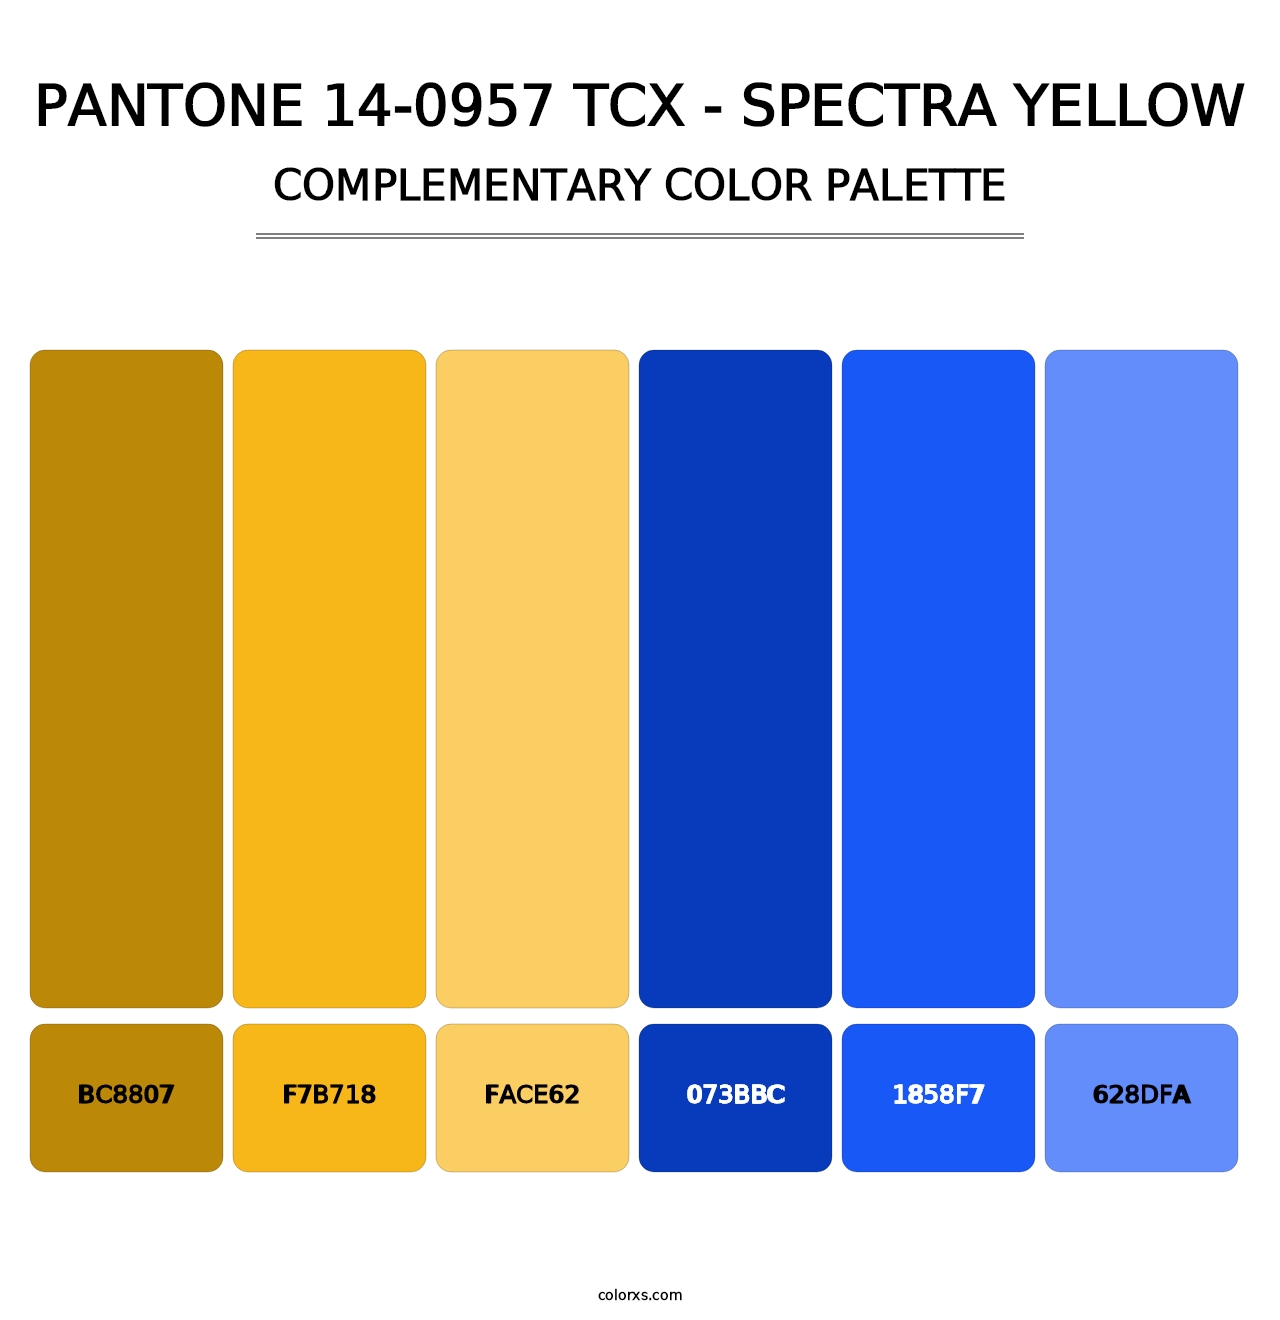 PANTONE 14-0957 TCX - Spectra Yellow - Complementary Color Palette